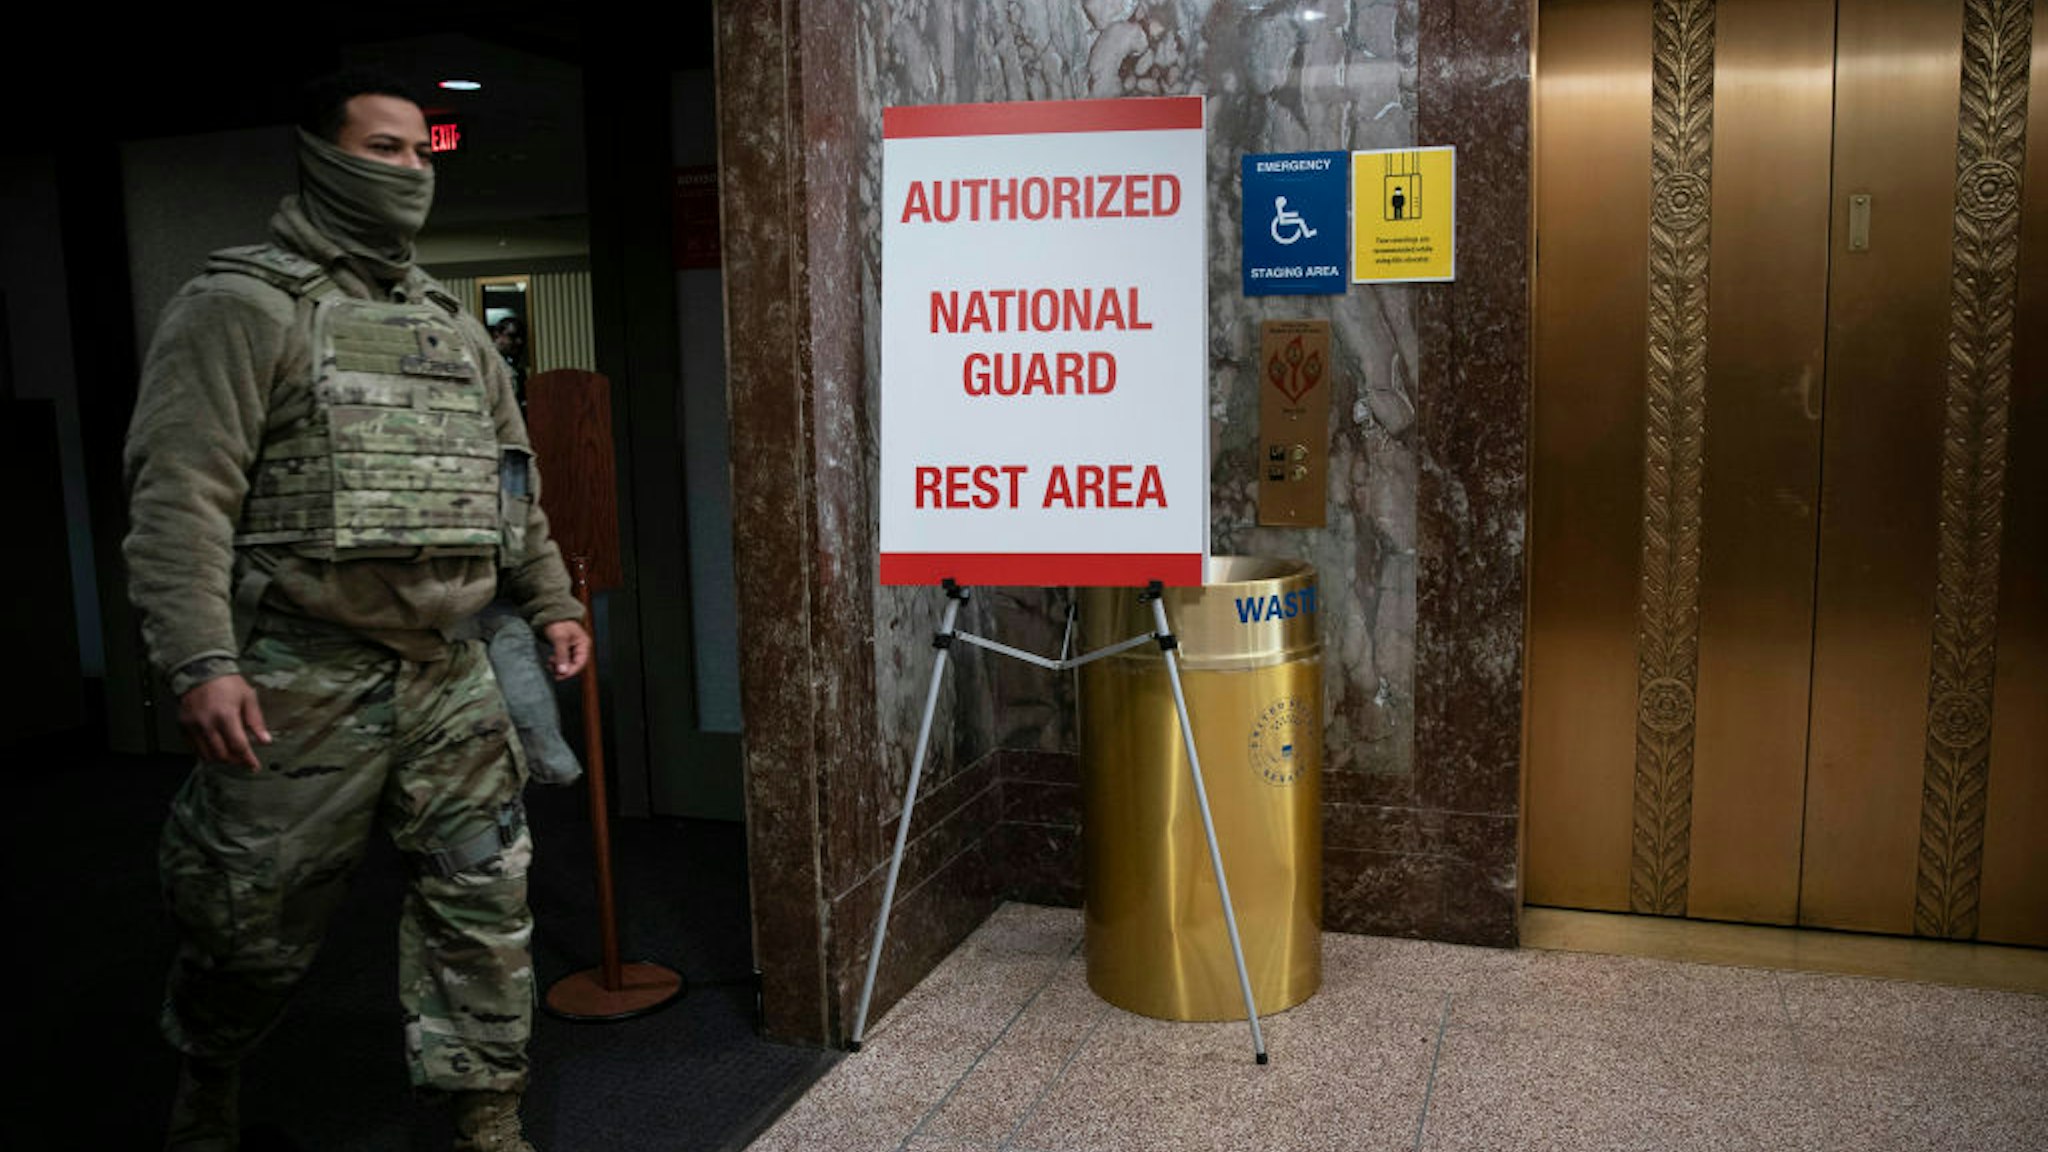 WASHINGTON, DC - JANUARY 22: A sign indicating a rest area for members of the National Guard is seen in the Dirksen Senate Office Building on January 22, 2021 in Washington, DC. News broke on Thursday that members of the National Guard have been forced to sleep in parking garages on Capitol Hill. (Photo by Sarah Silbiger/Getty Images)